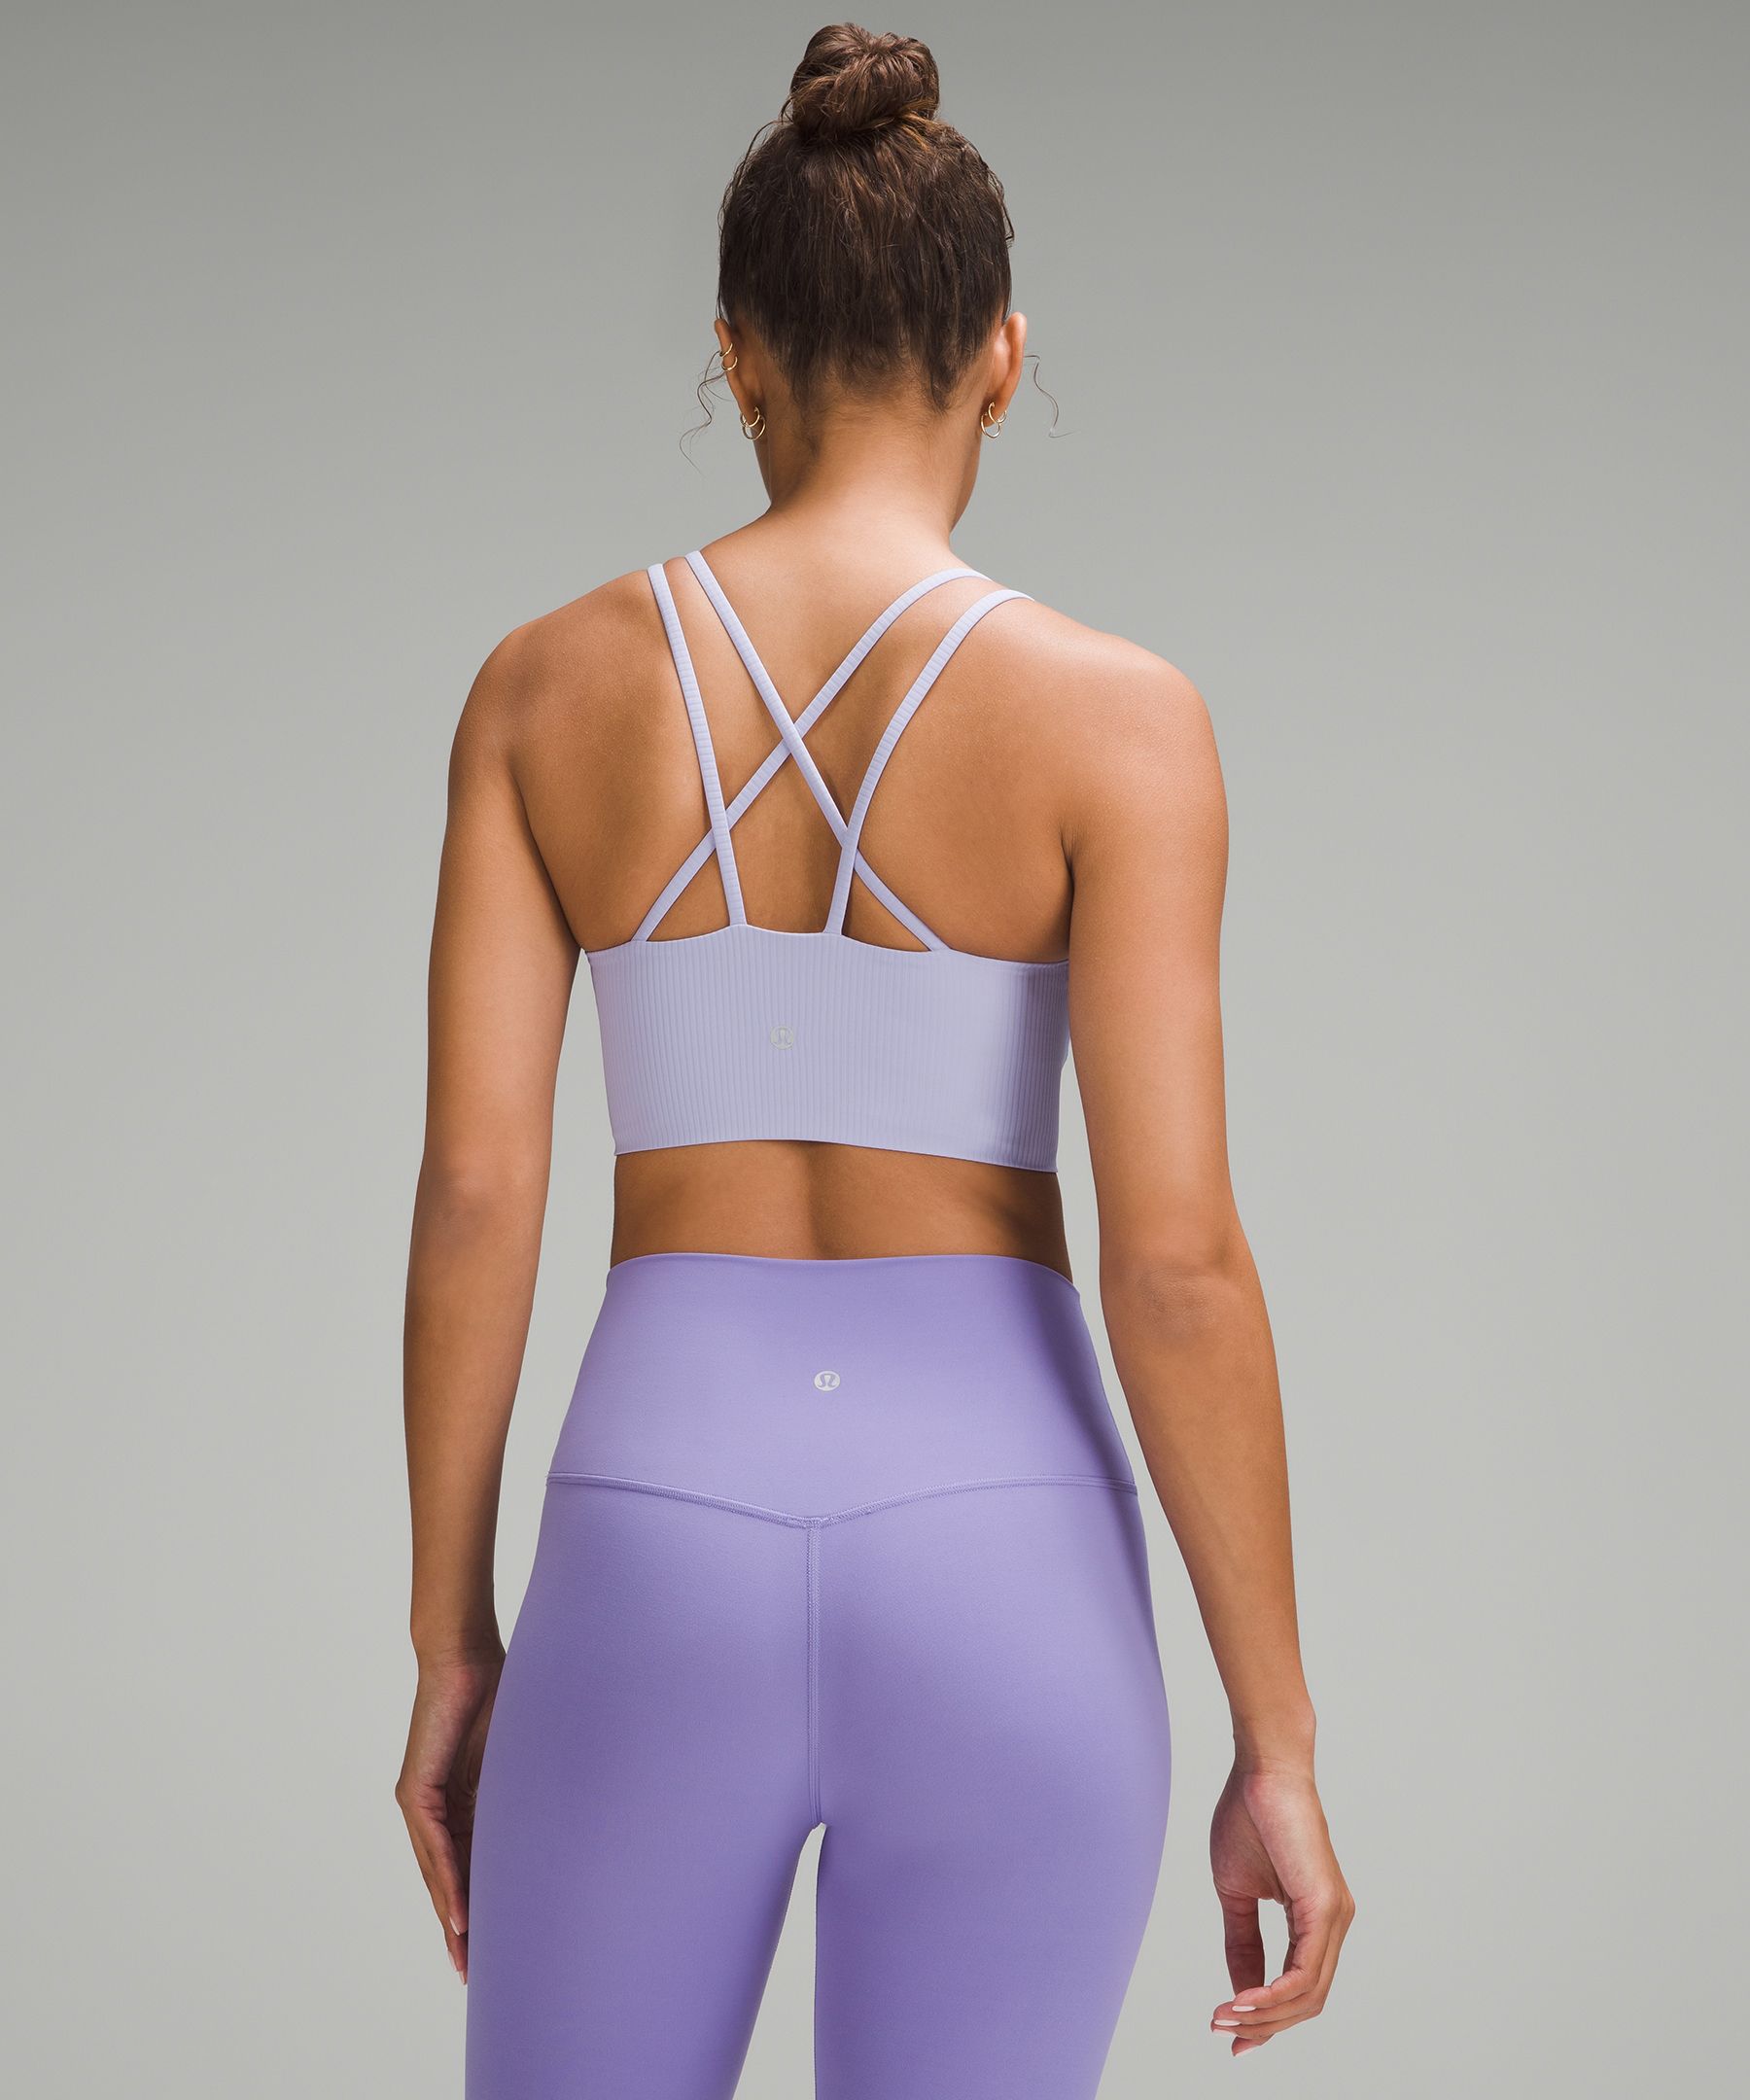 Does Lululemon Have BPA in Their Sports Bras? - Playbite